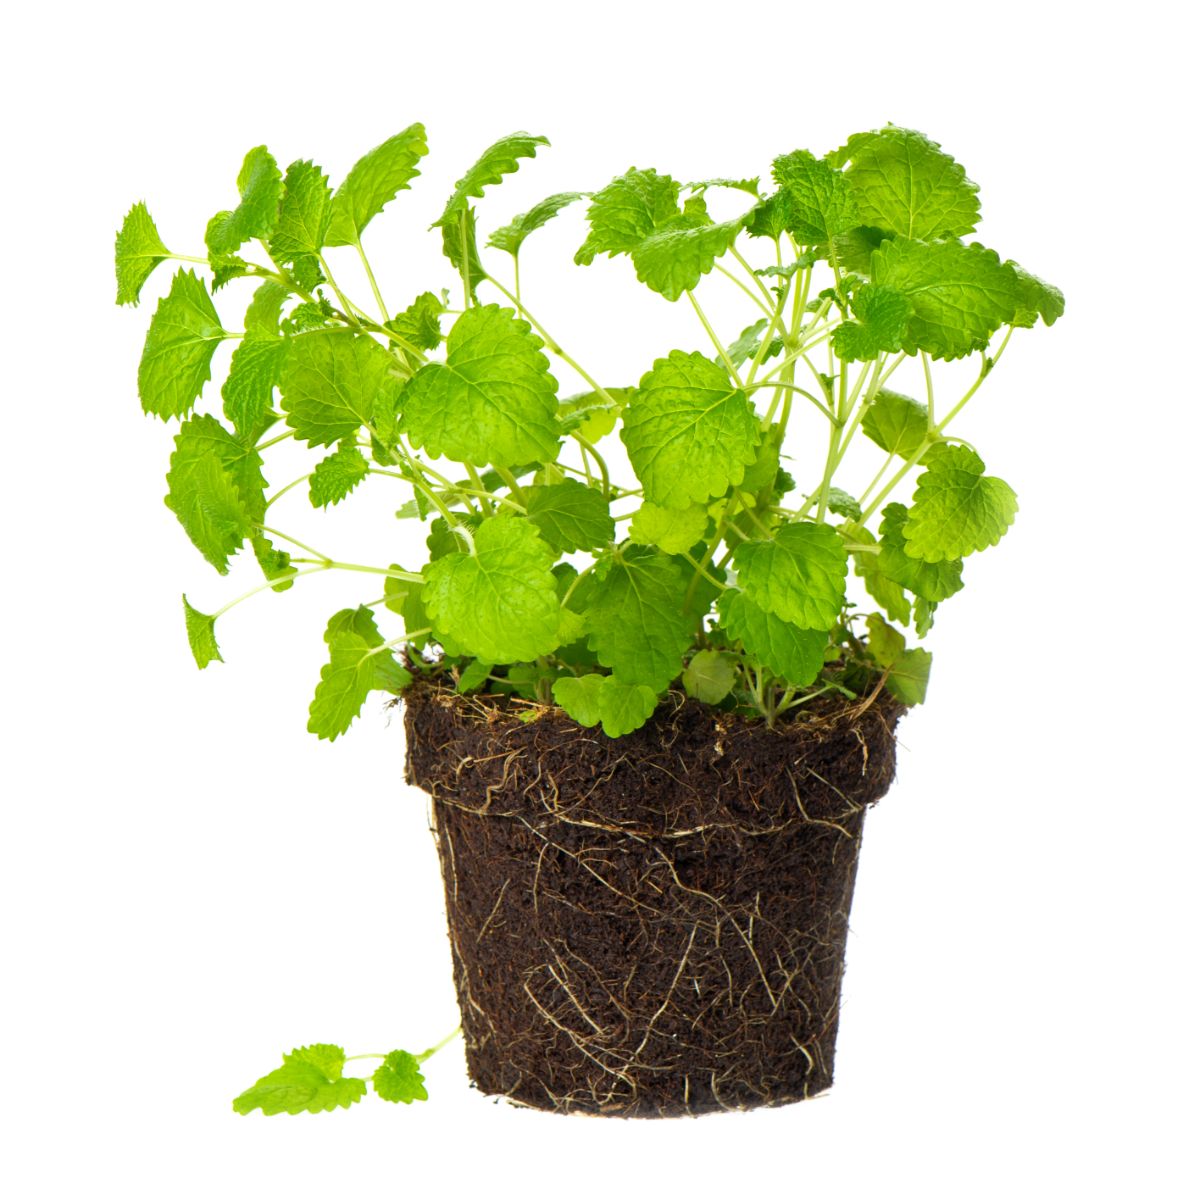 A large potted lemon balm can be divided into two or more plants